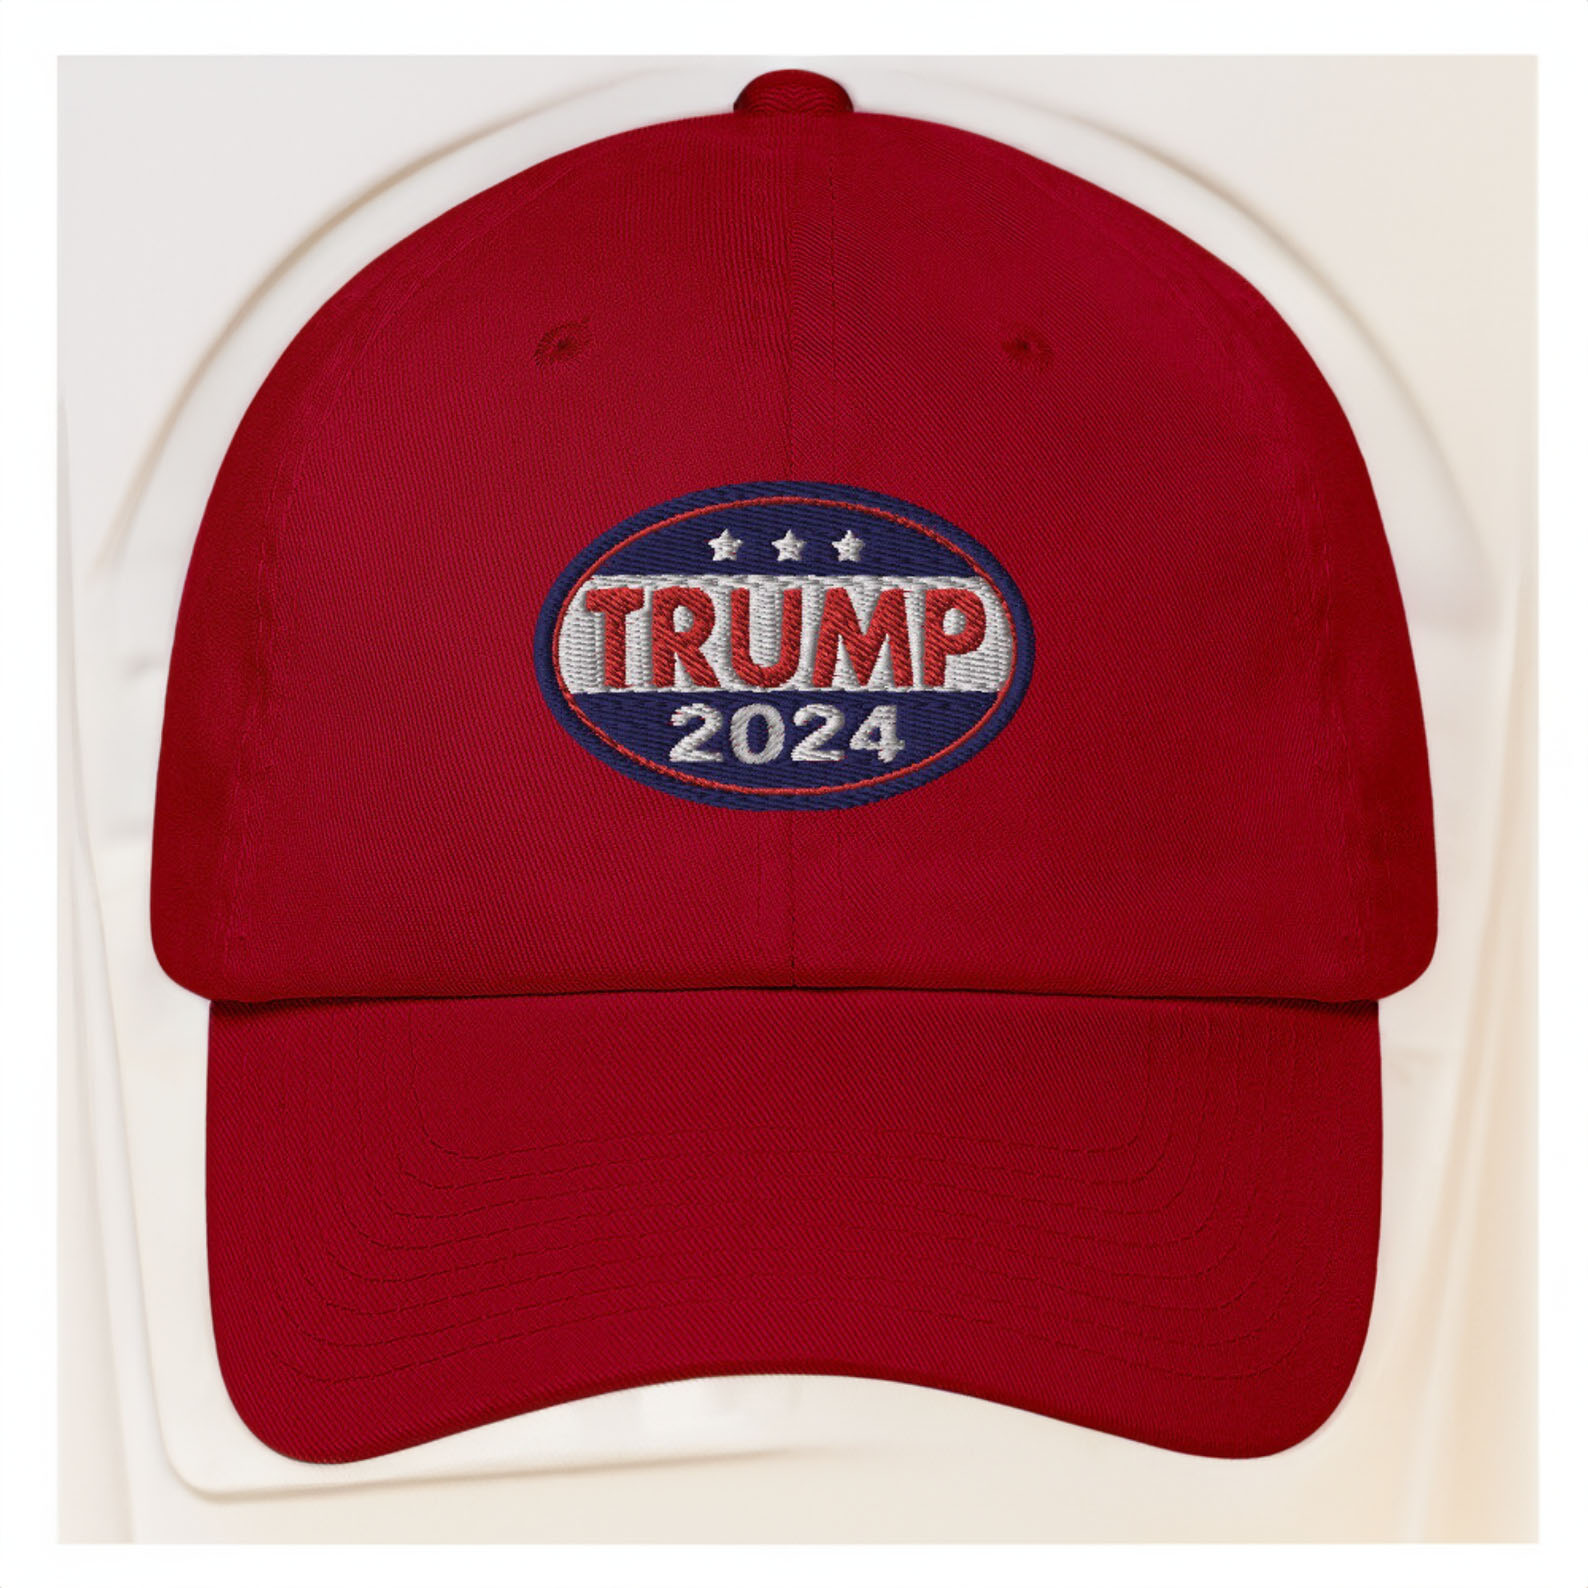 Trump 2024 Presidential Campaign Embroidered Adjustable Baseball Cap Dad Hat